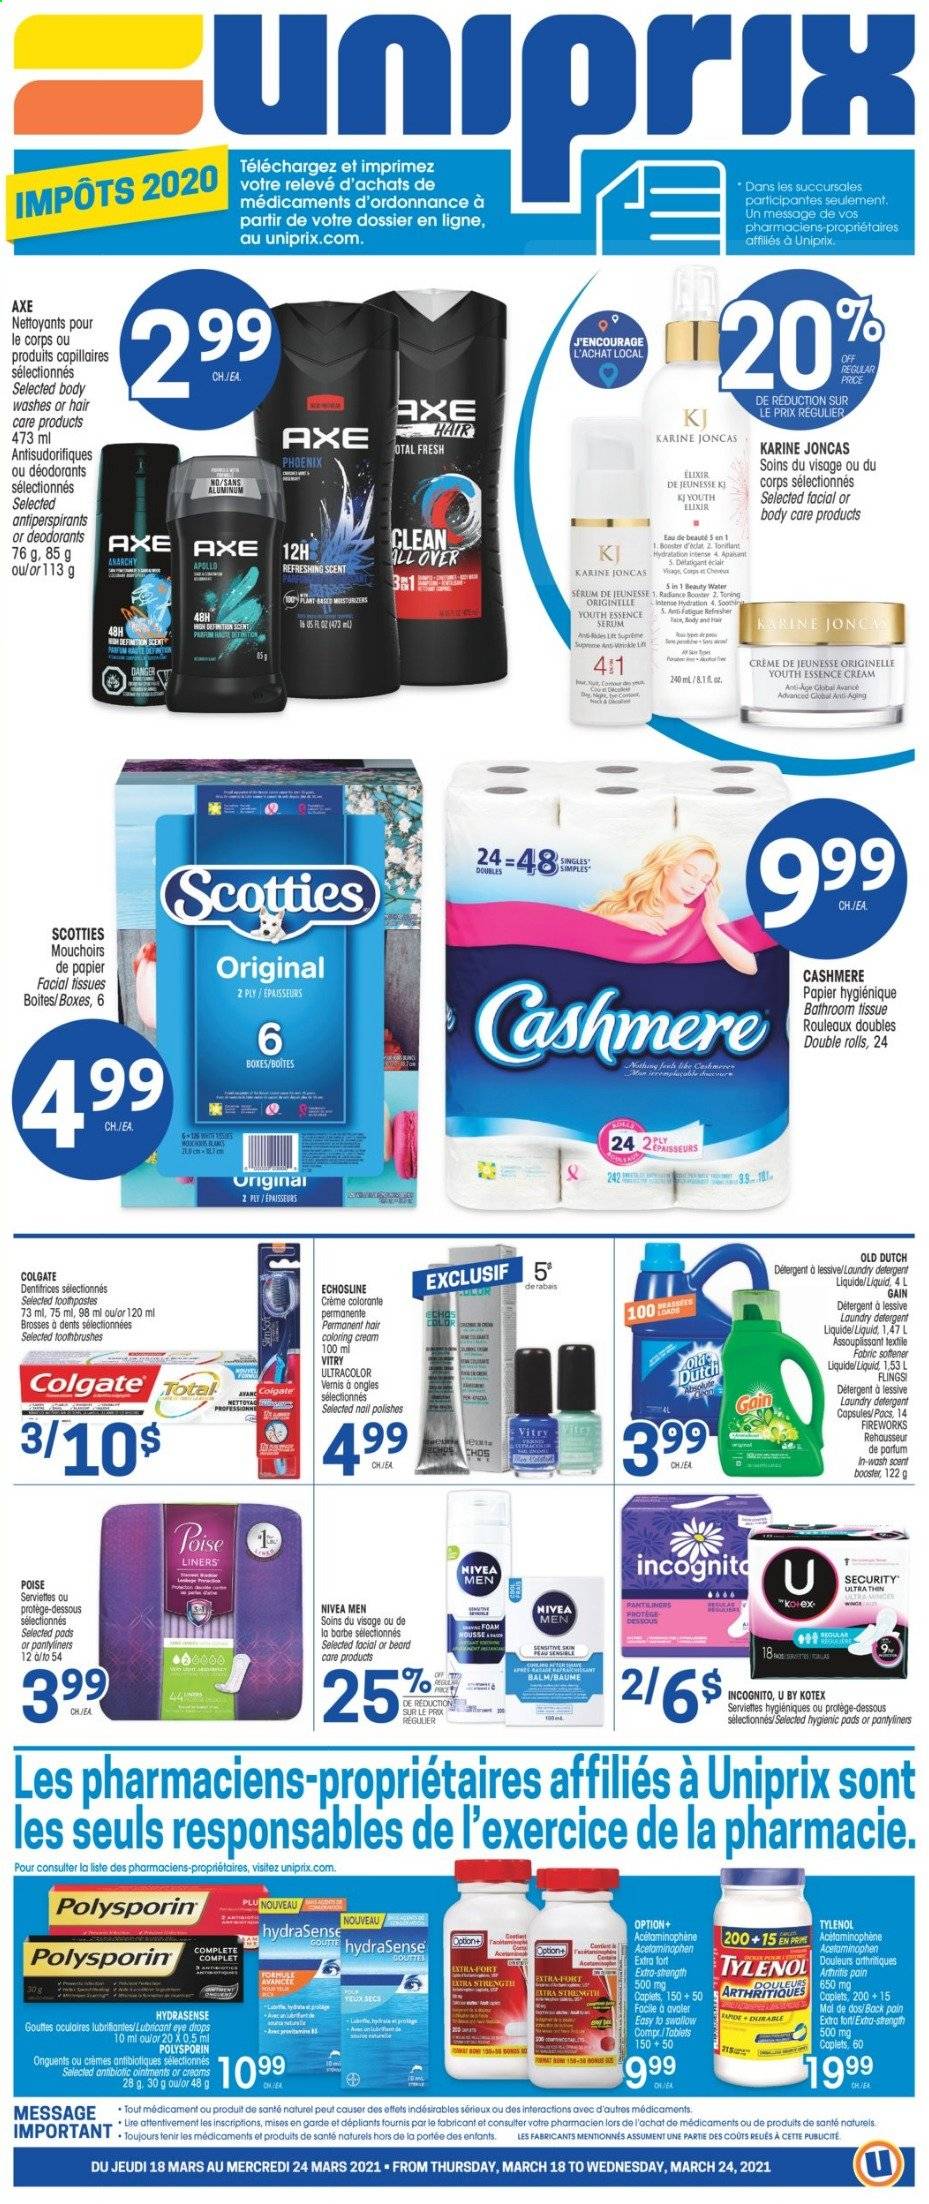 thumbnail - Uniprix Flyer - March 18, 2021 - March 24, 2021 - Sales products - Mars, bath tissue, Gain, fabric softener, laundry detergent, Kotex, pantyliners, facial tissues, serum, lubricant, Tylenol, eye drops, Nivea, deodorant. Page 1.